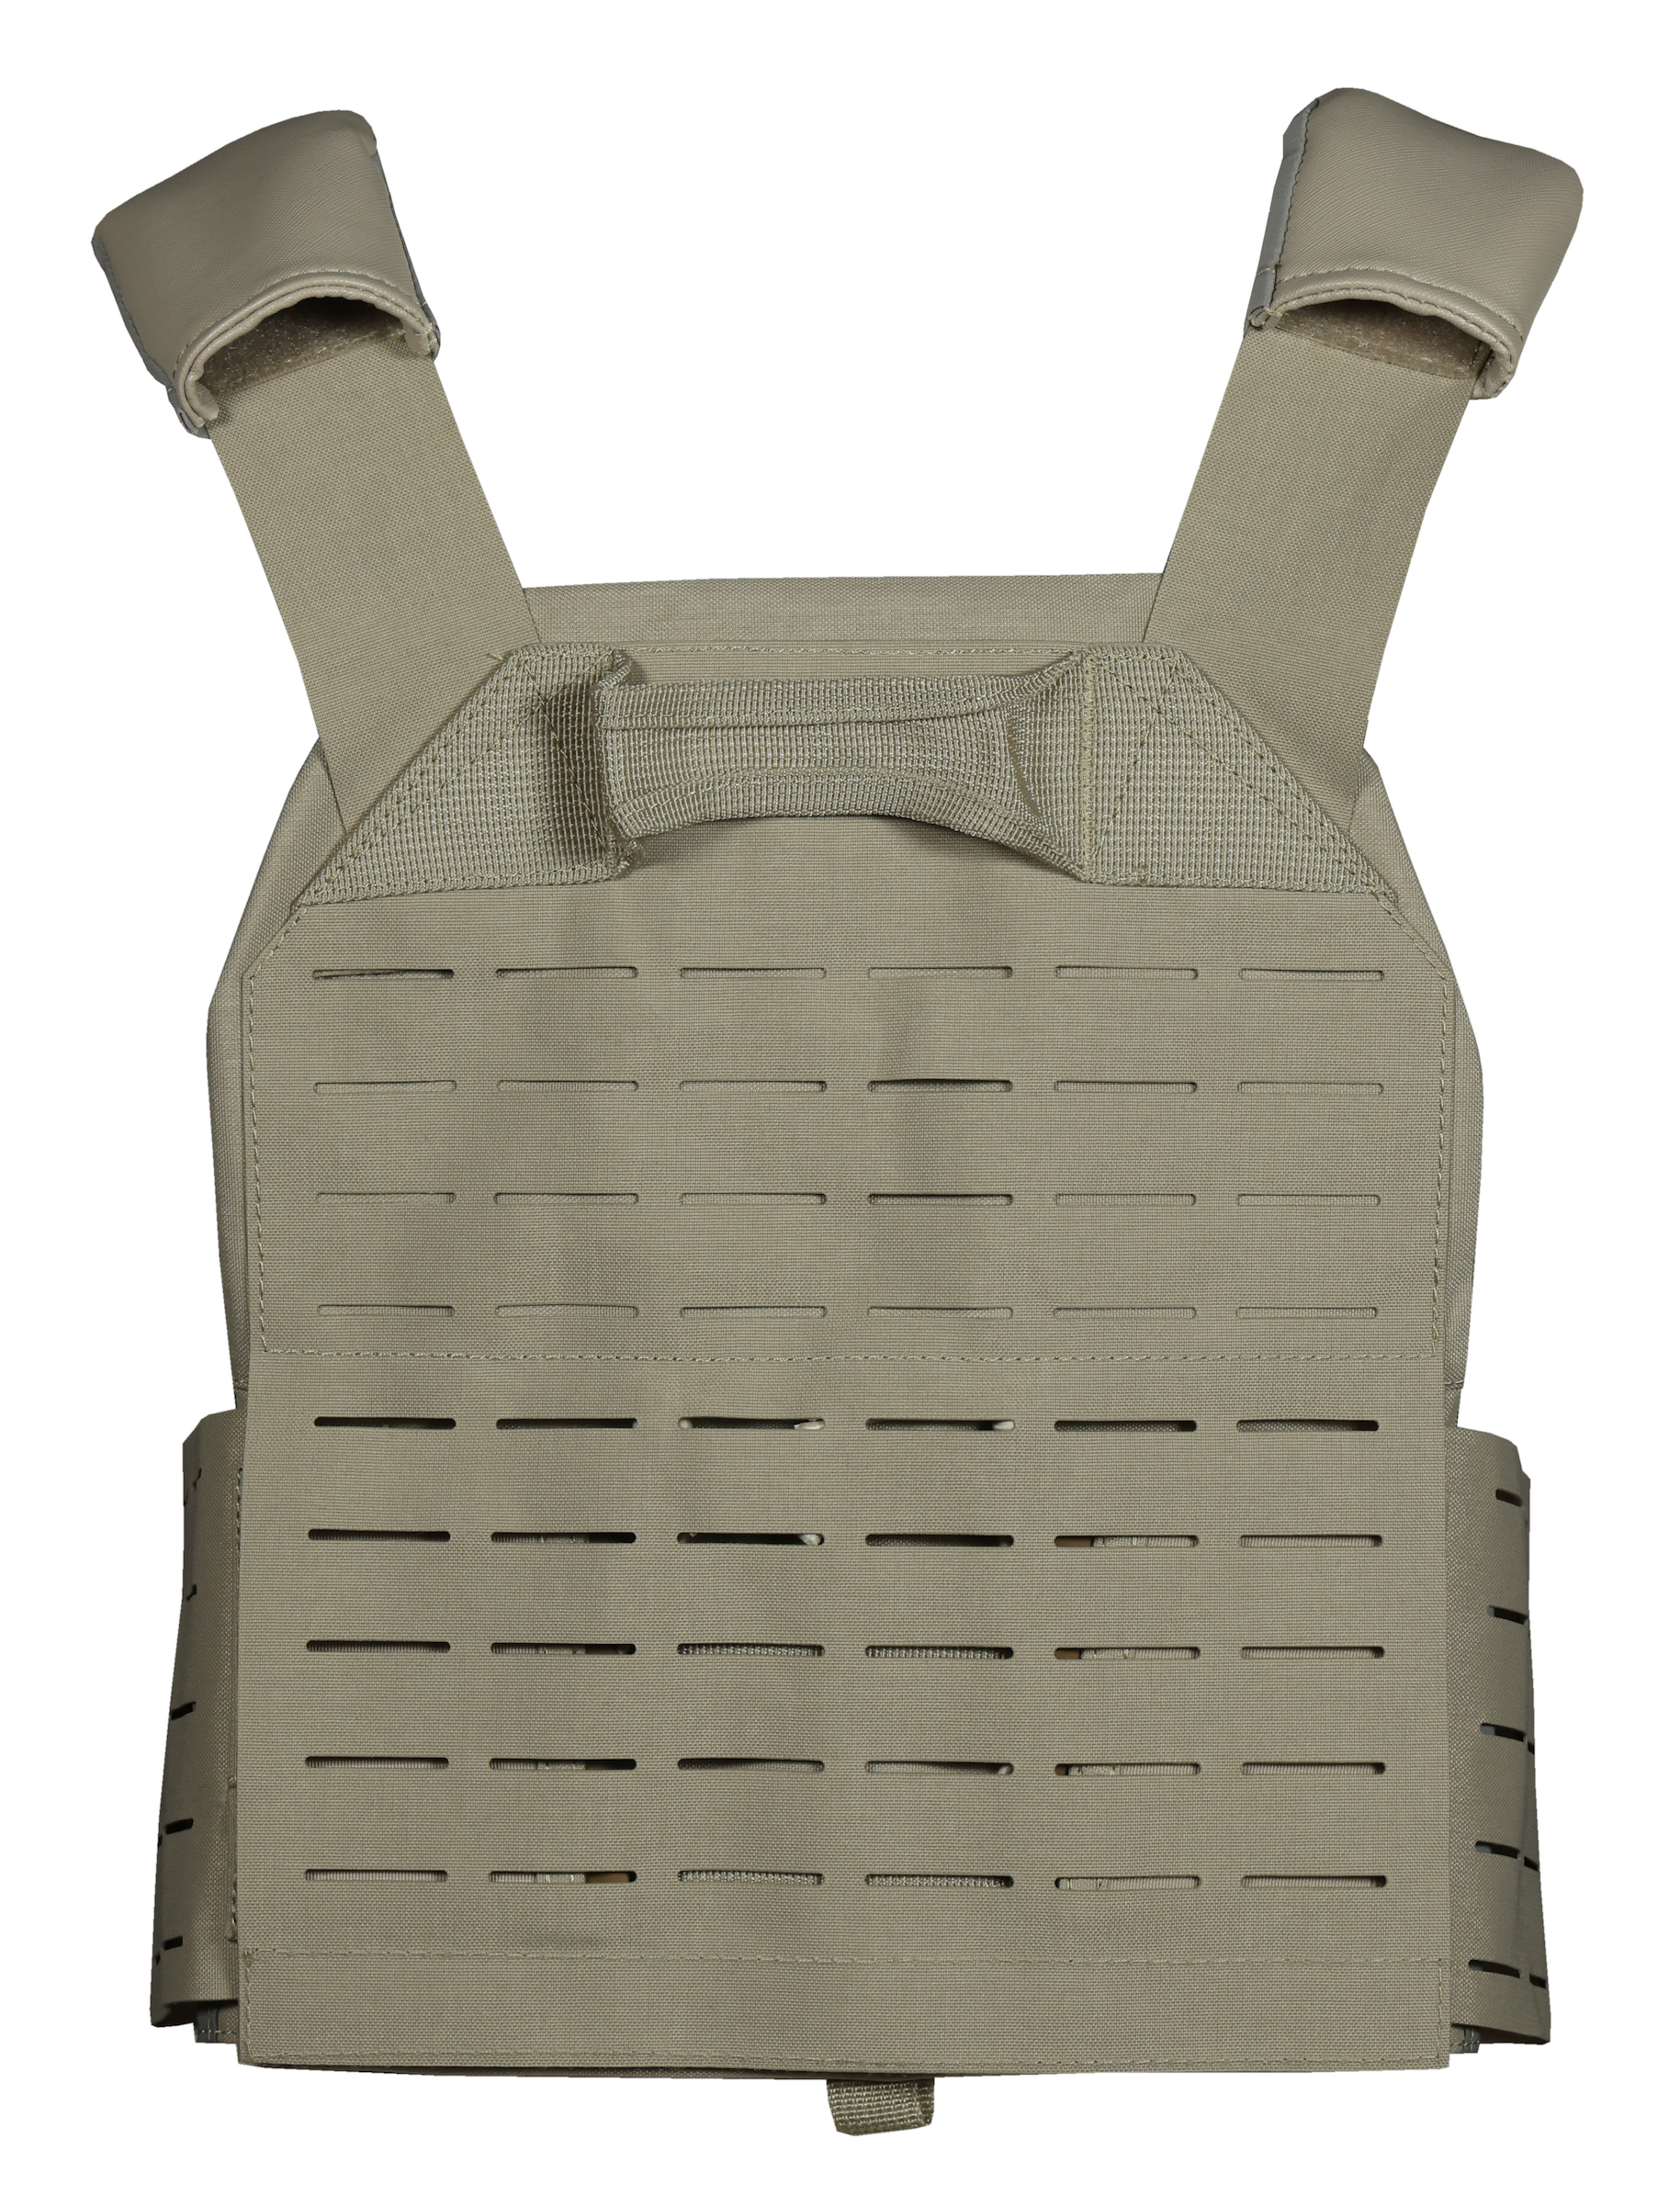 PLATE CARRIER SF